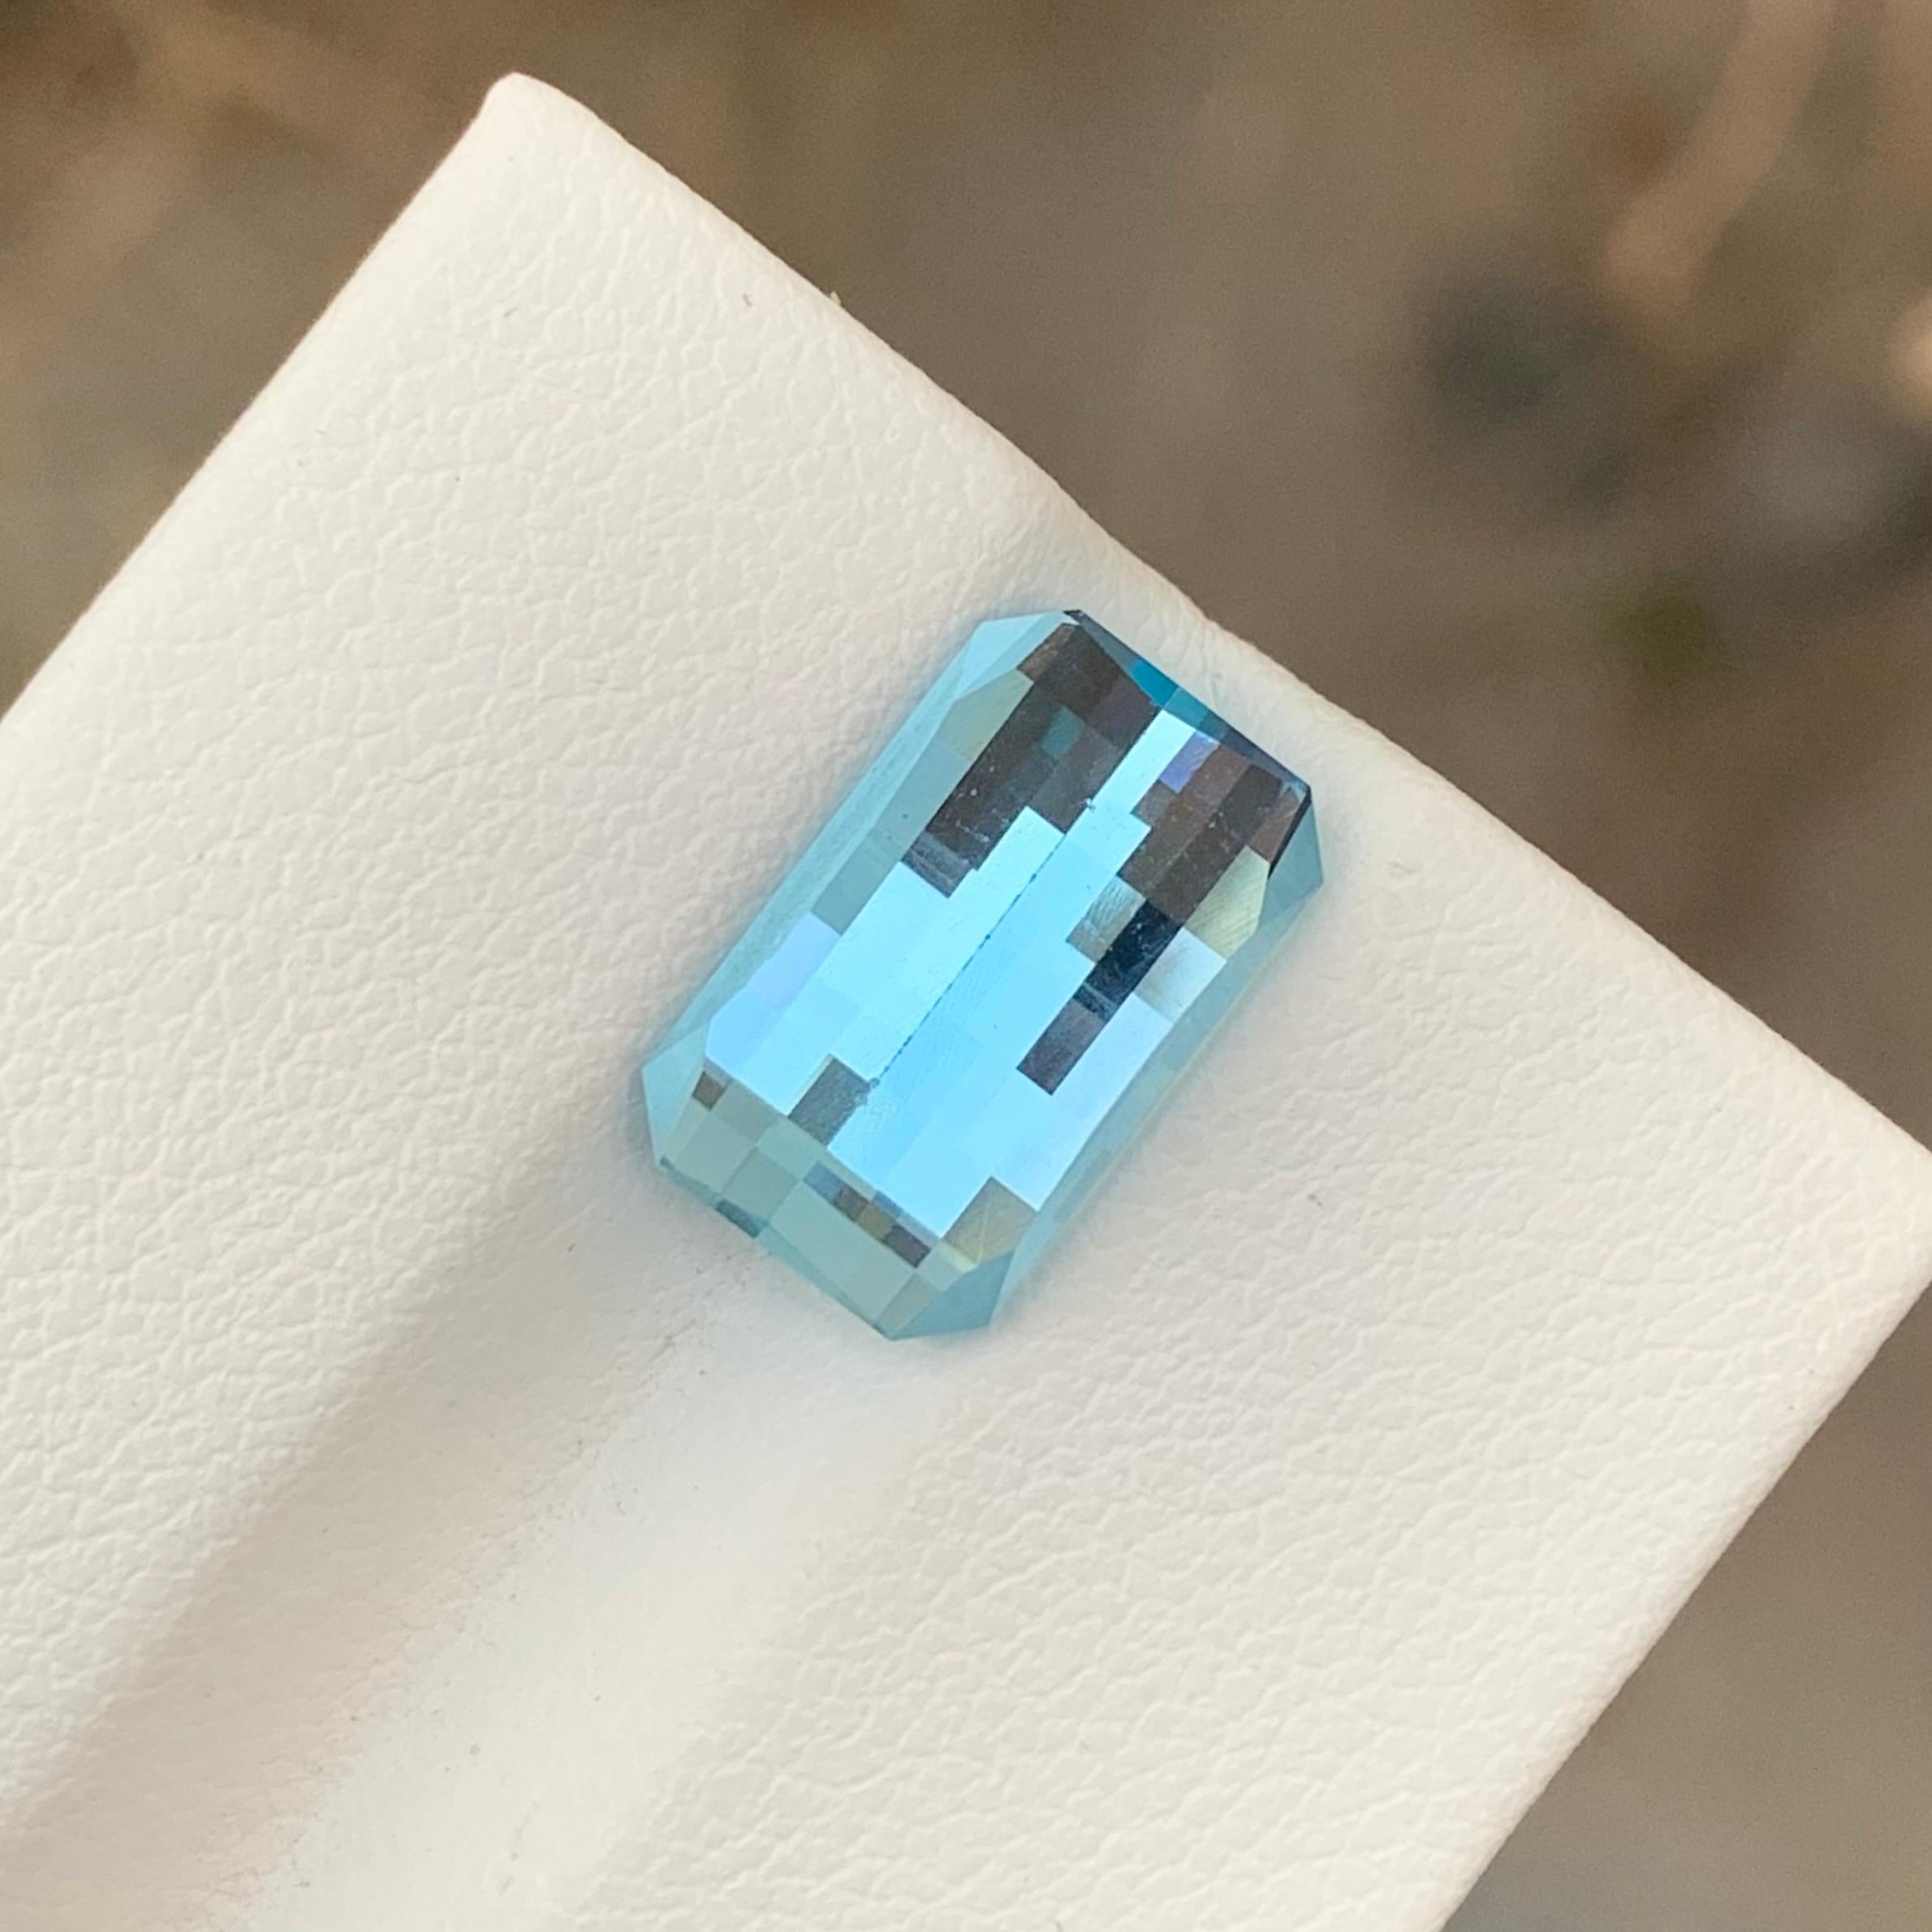 Arts and Crafts Stunning 6.15 Carats Pixelated Cut Loose Sky Blue Topaz Earth Mine Ring Gem For Sale